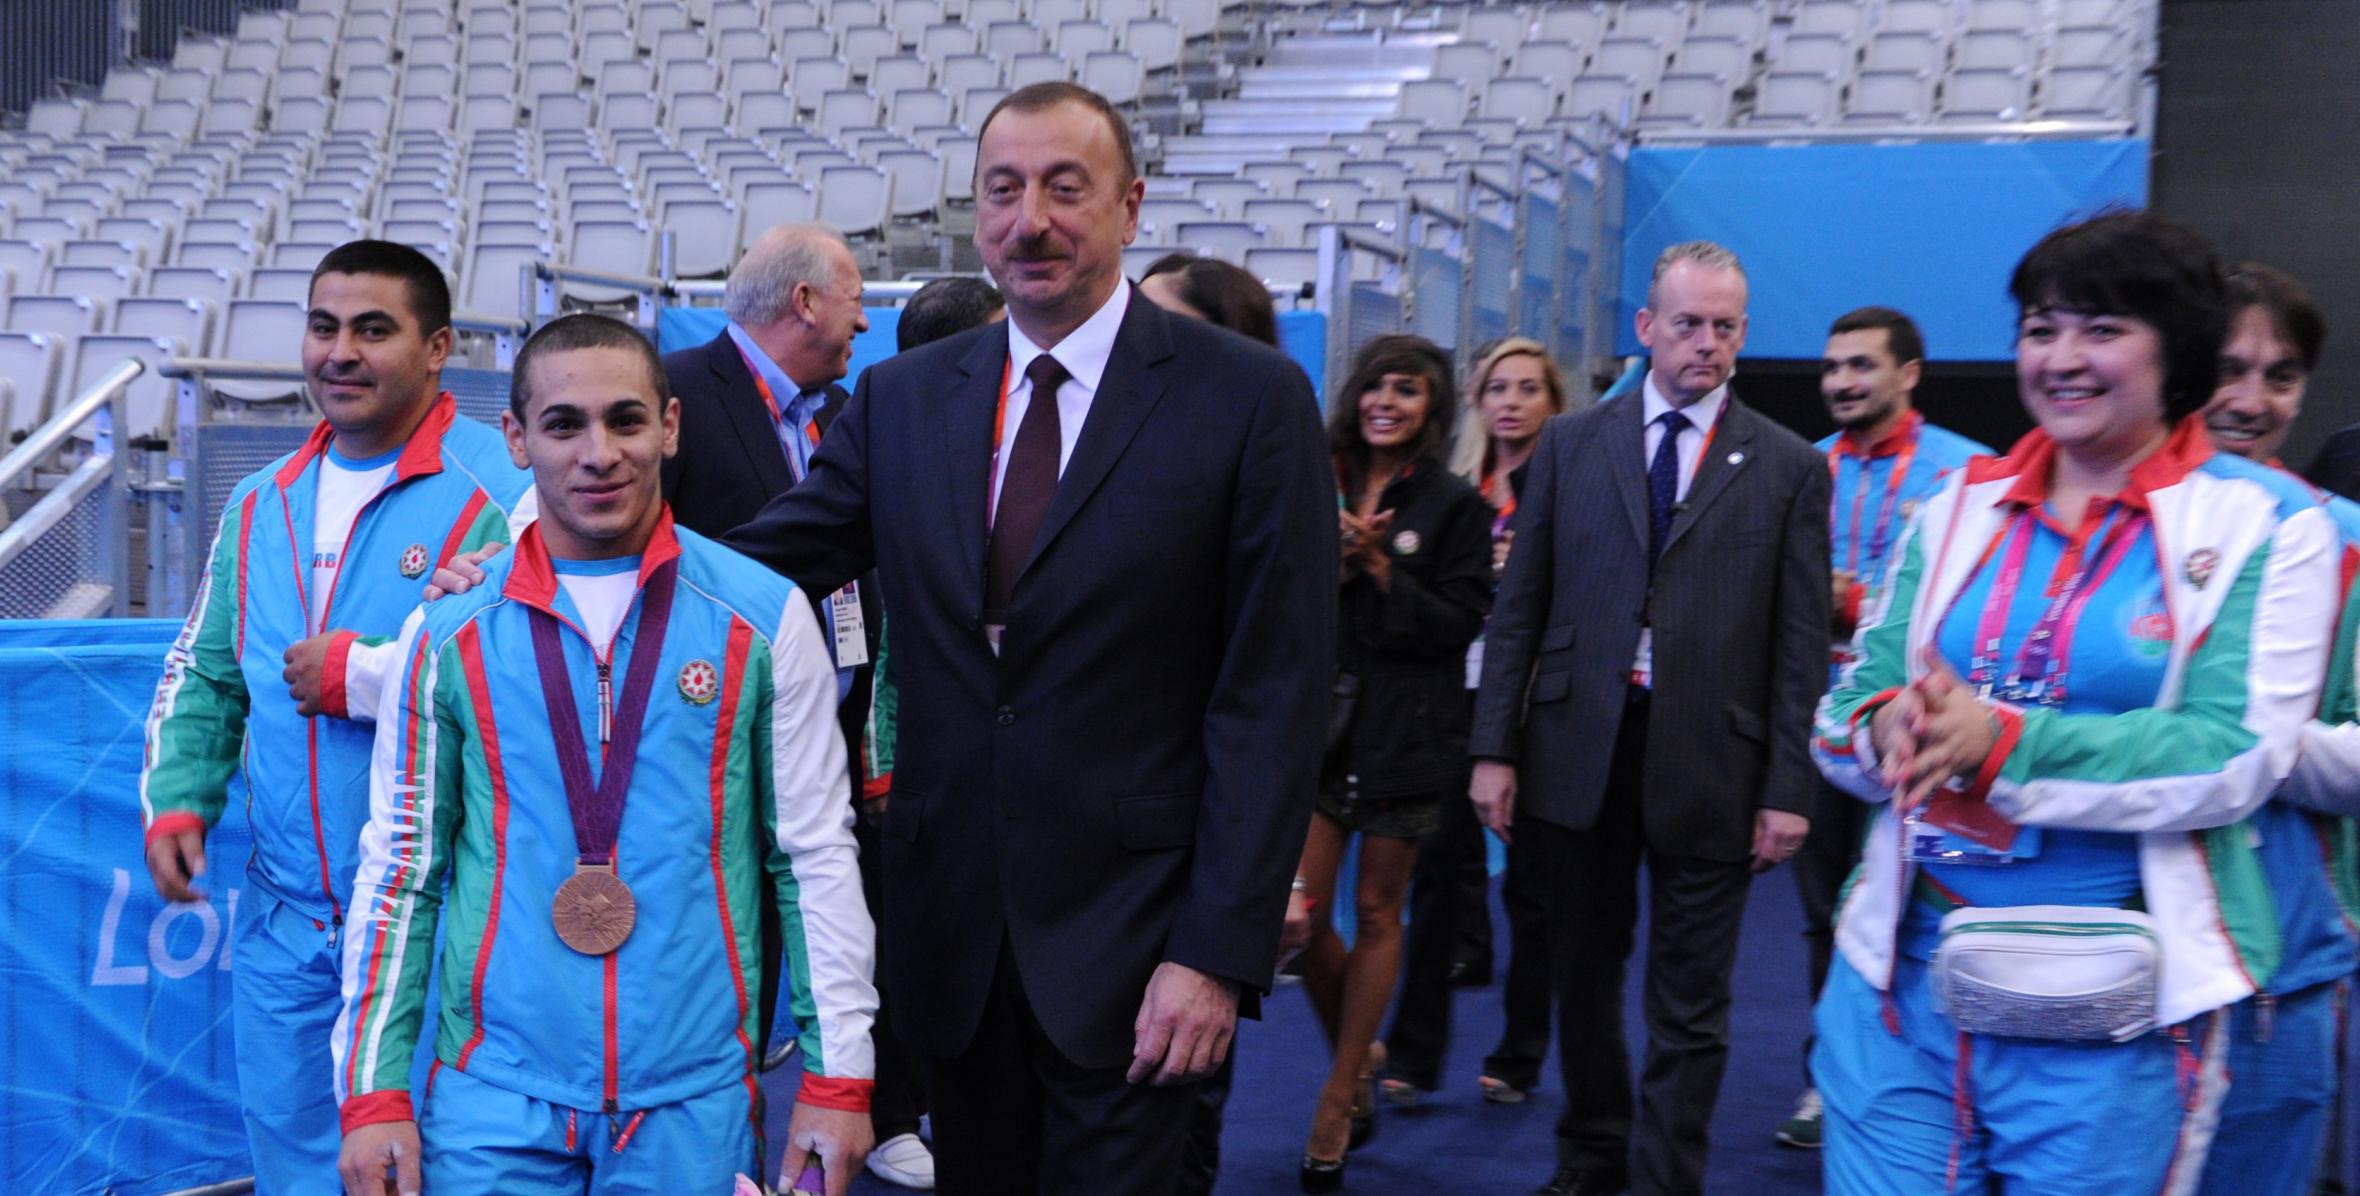 Ilham Aliyev watched the weightlifting competition of the London Olympics in which an Azerbaijani athlete won bronze